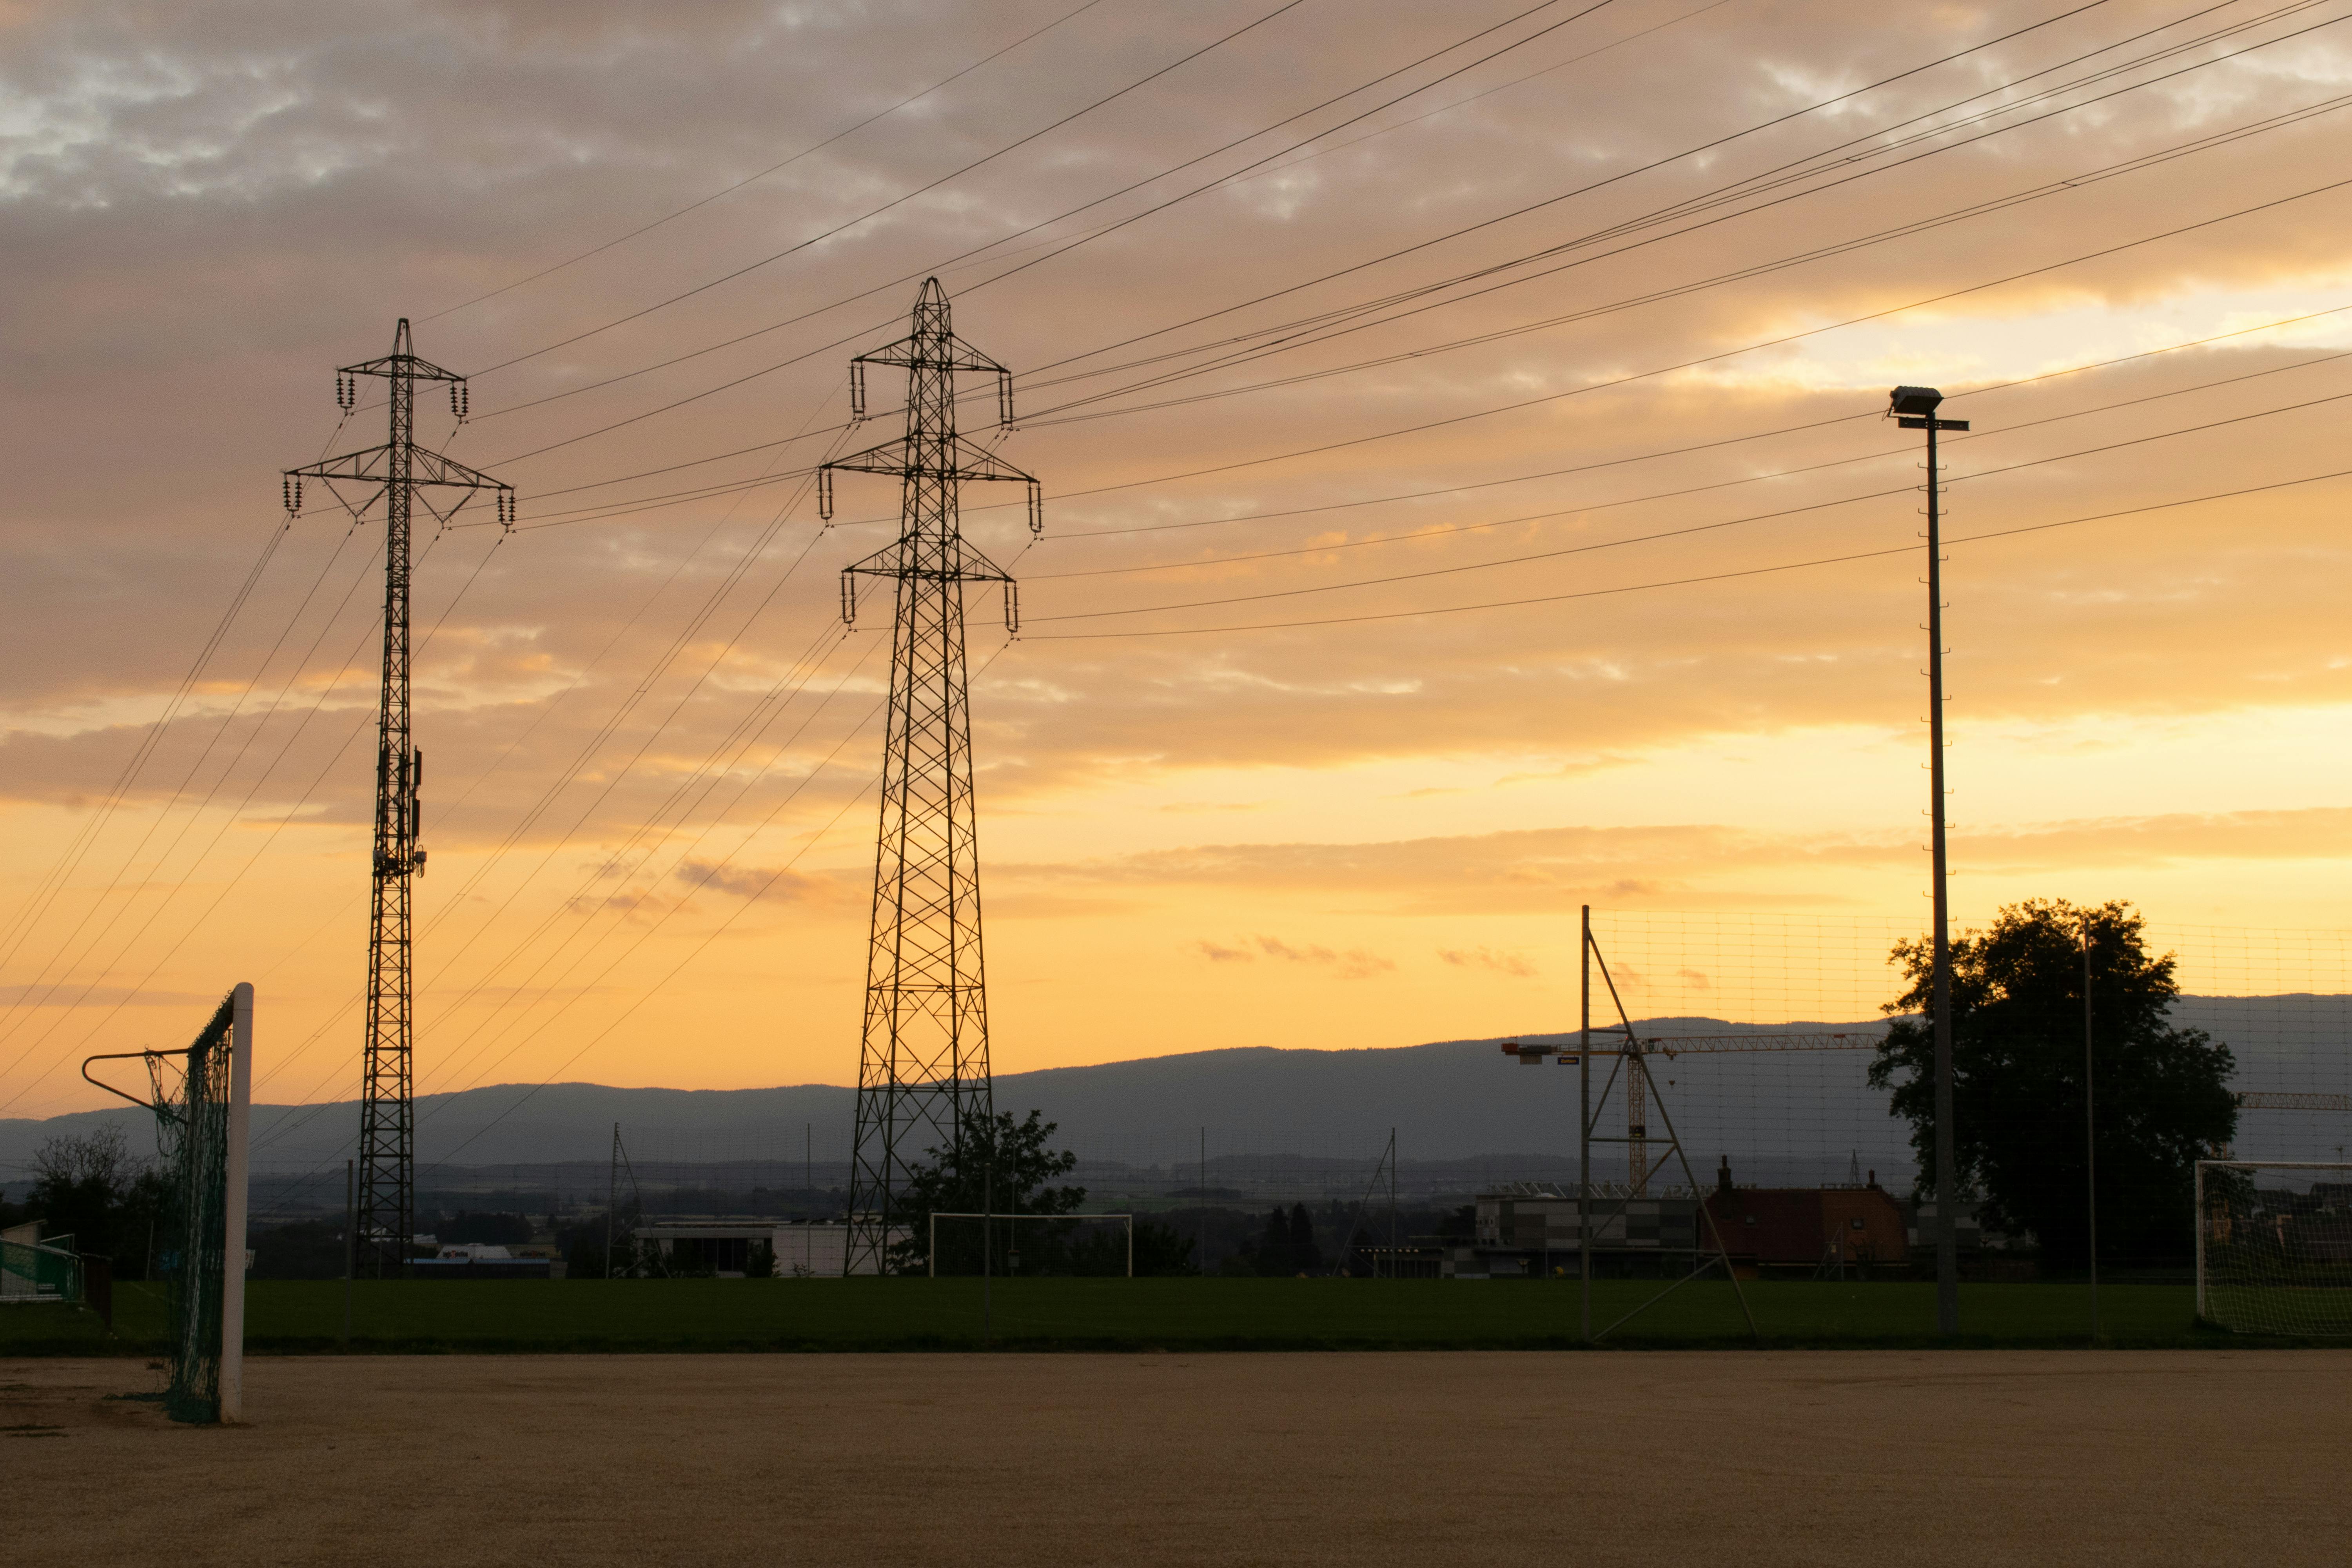 Free stock photo of electric lines, football field, golden sunset